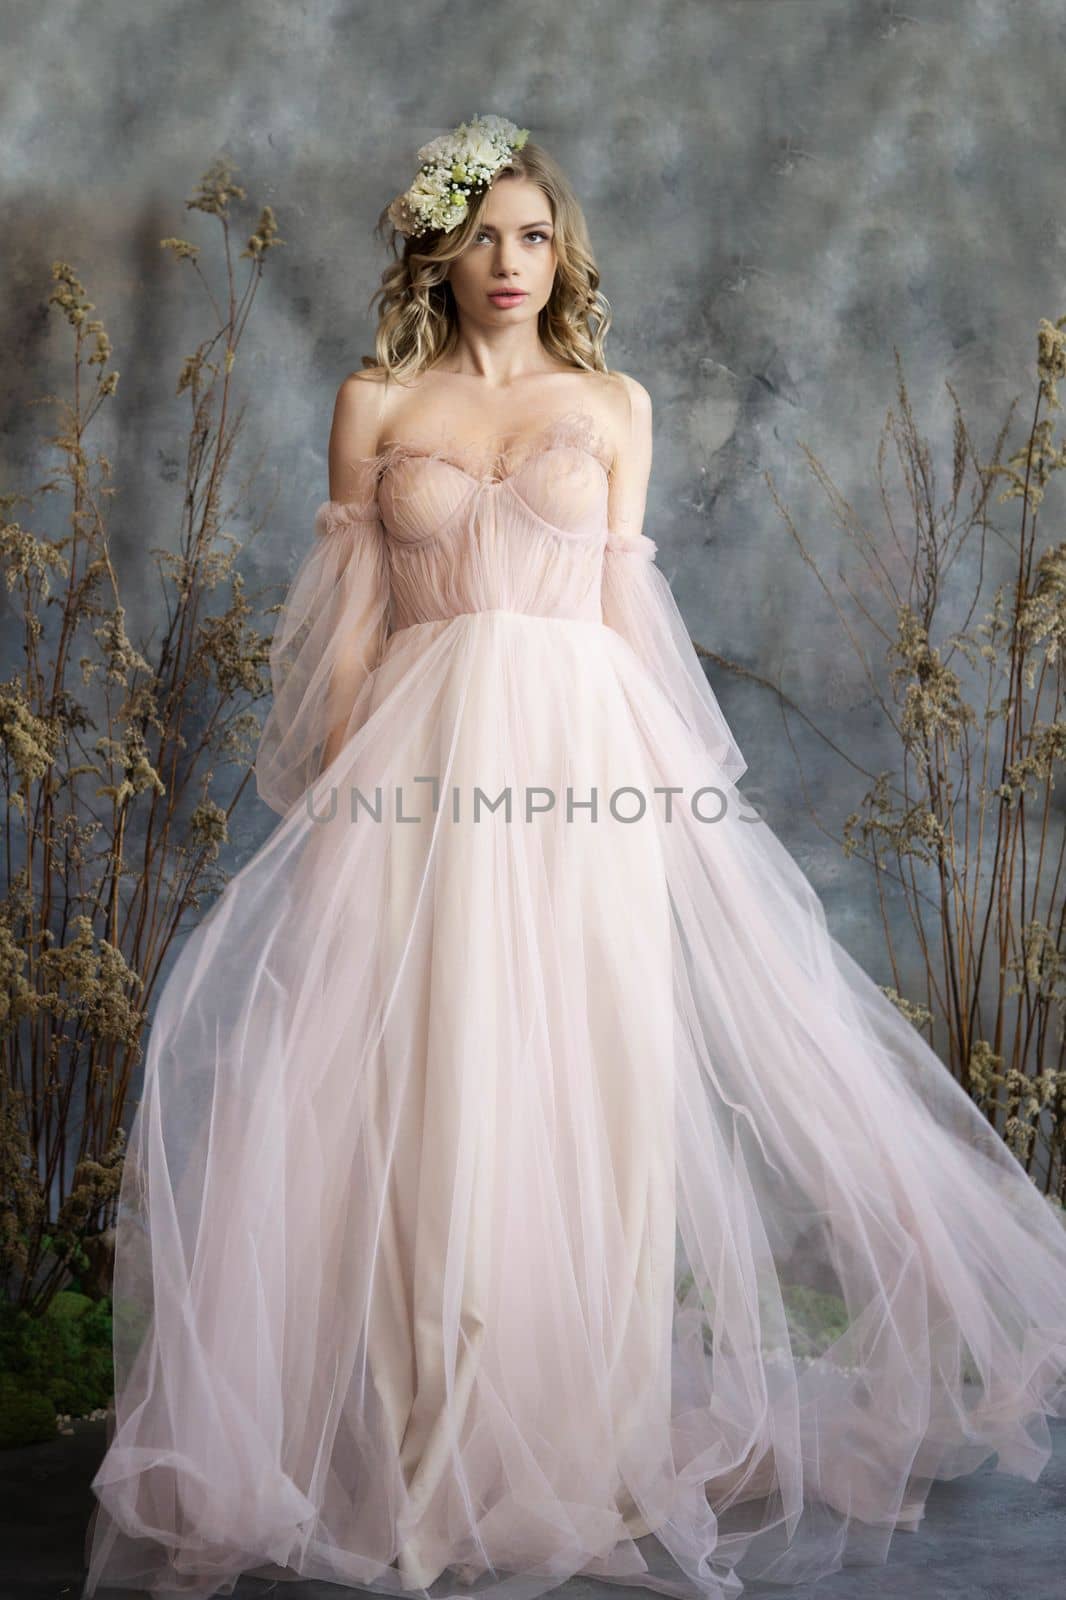 A young blonde in an airy tulle pink dress. Spring portrait of a woman